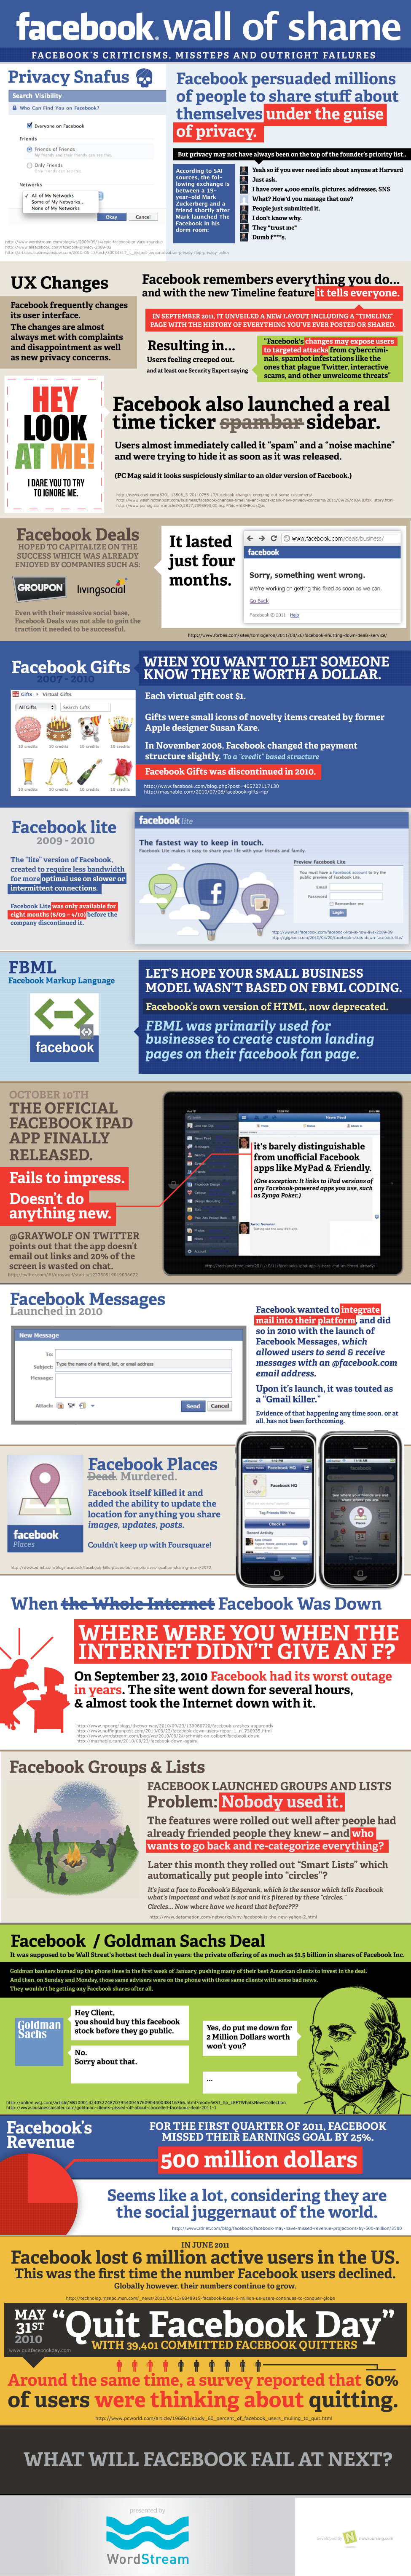 Facebook Wall Of Shame (Infographic)